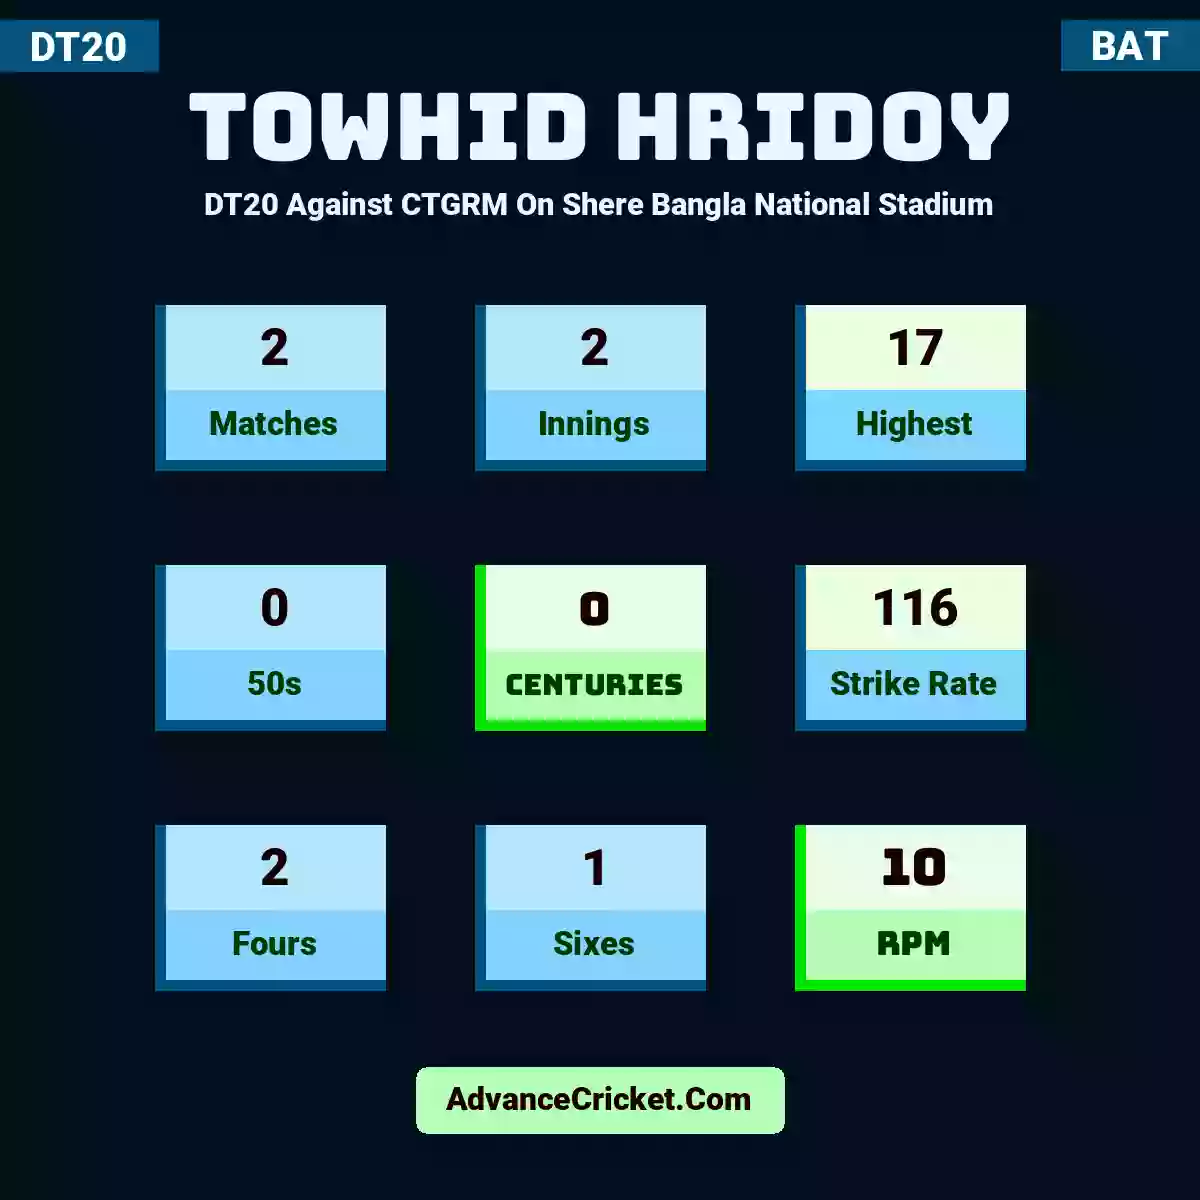 Towhid Hridoy DT20  Against CTGRM On Shere Bangla National Stadium, Towhid Hridoy played 2 matches, scored 17 runs as highest, 0 half-centuries, and 0 centuries, with a strike rate of 116. T.Hridoy hit 2 fours and 1 sixes, with an RPM of 10.